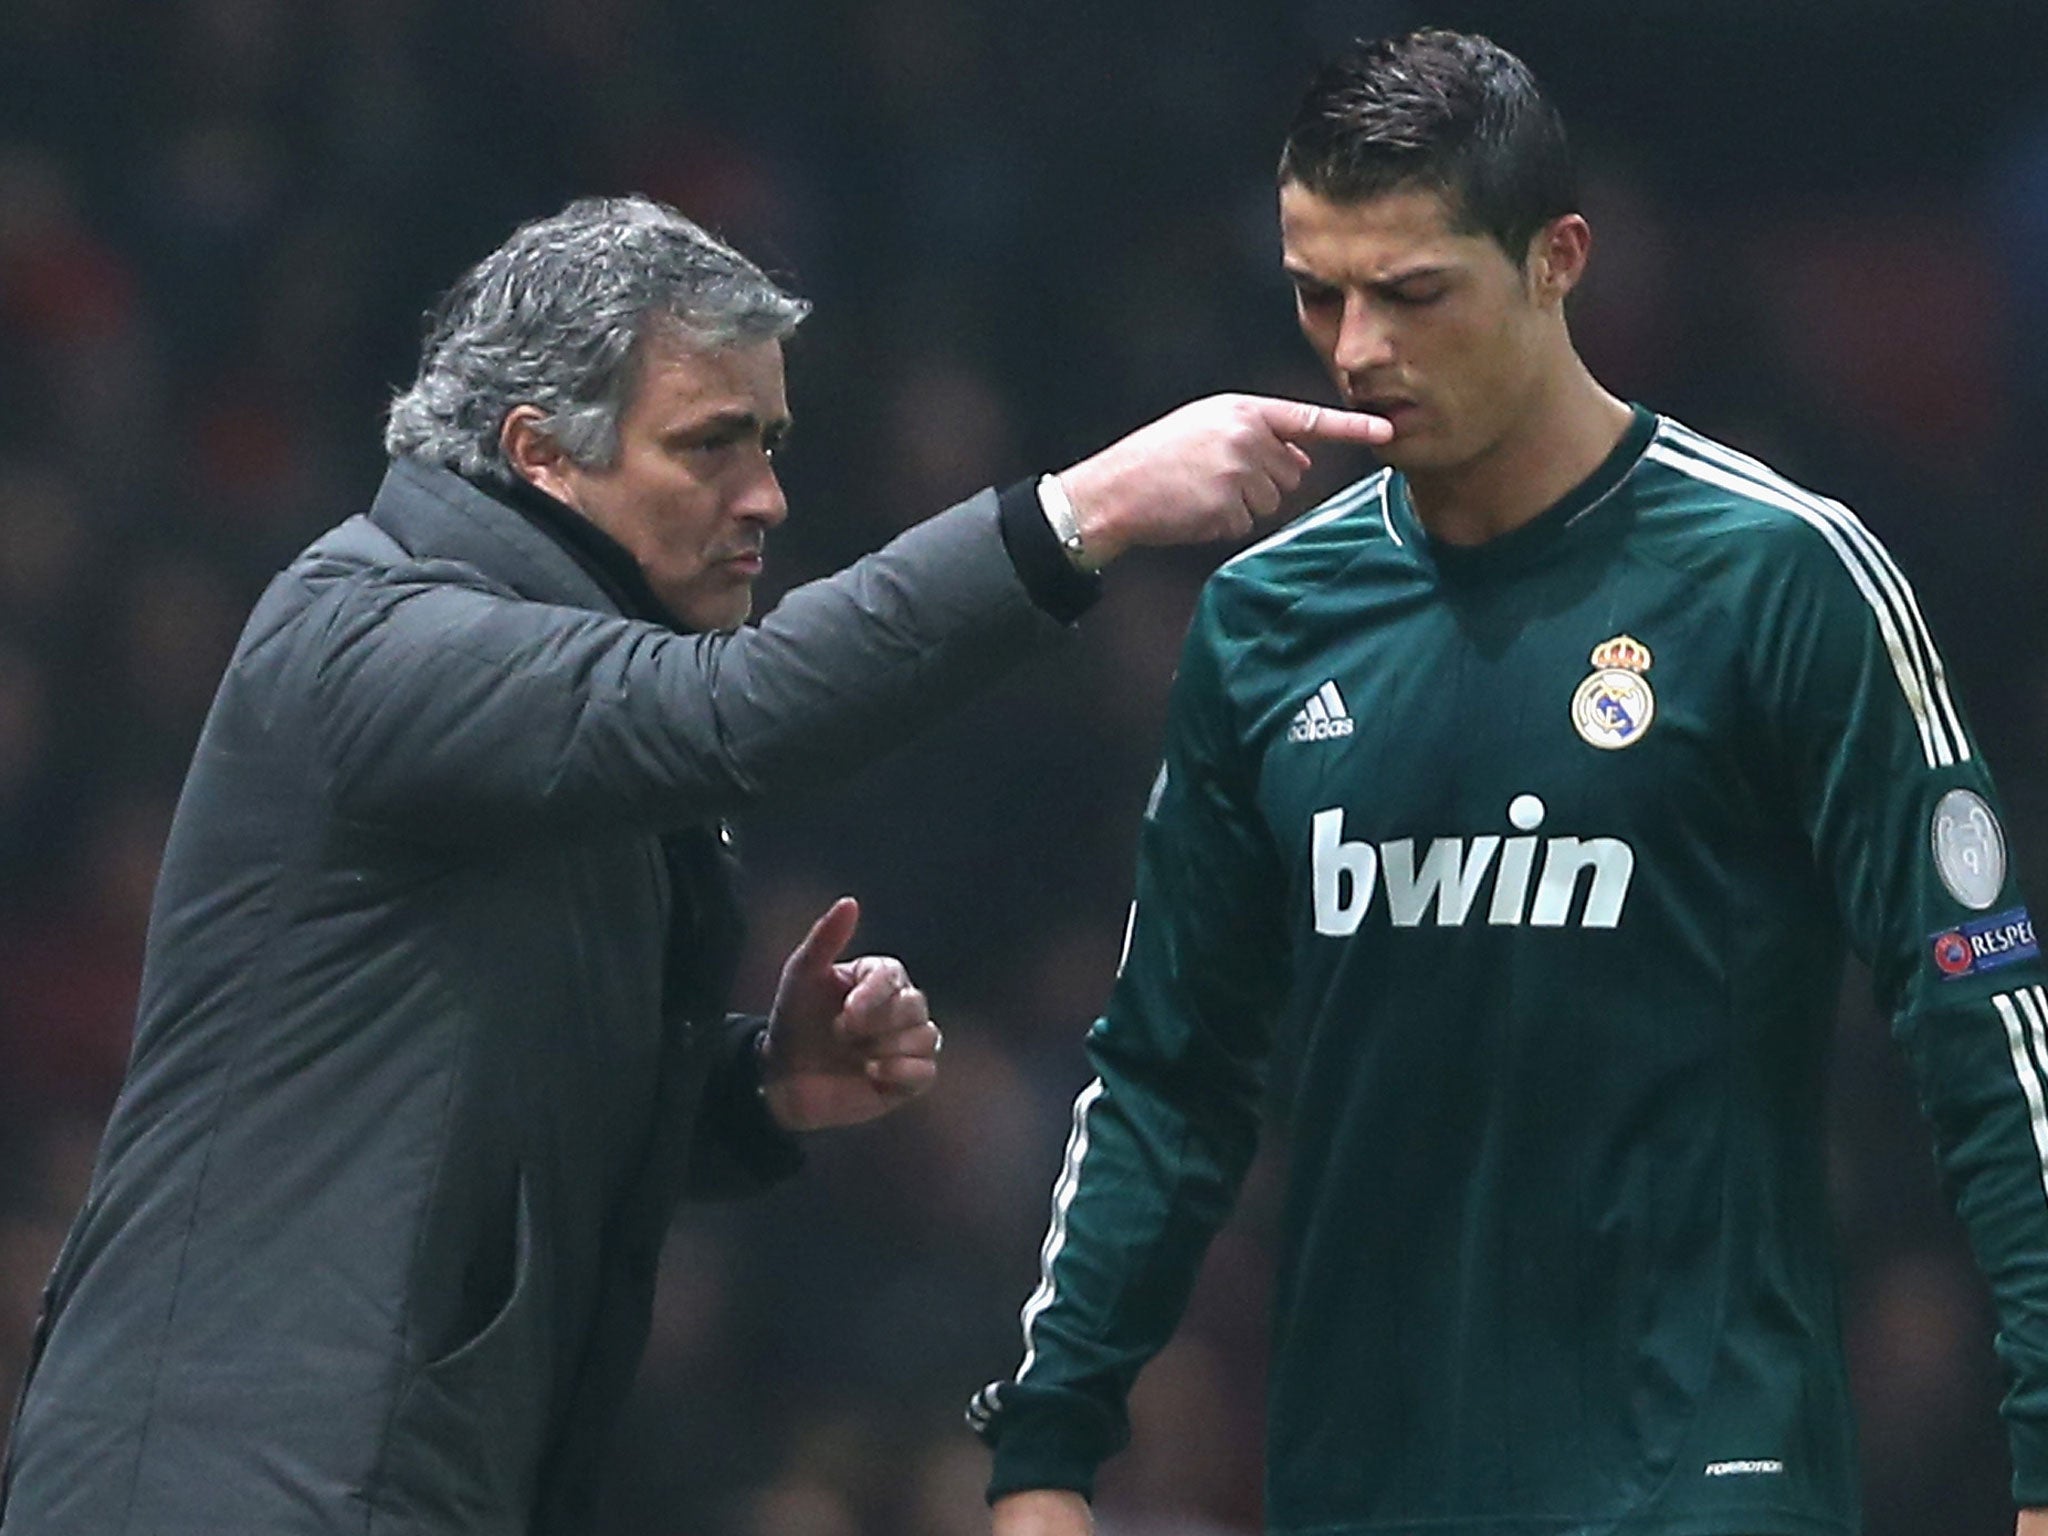 Jose Mourinho gives Cristiano Ronaldo instructions in Real Madrid's 2-1 victory at Manchester United last season